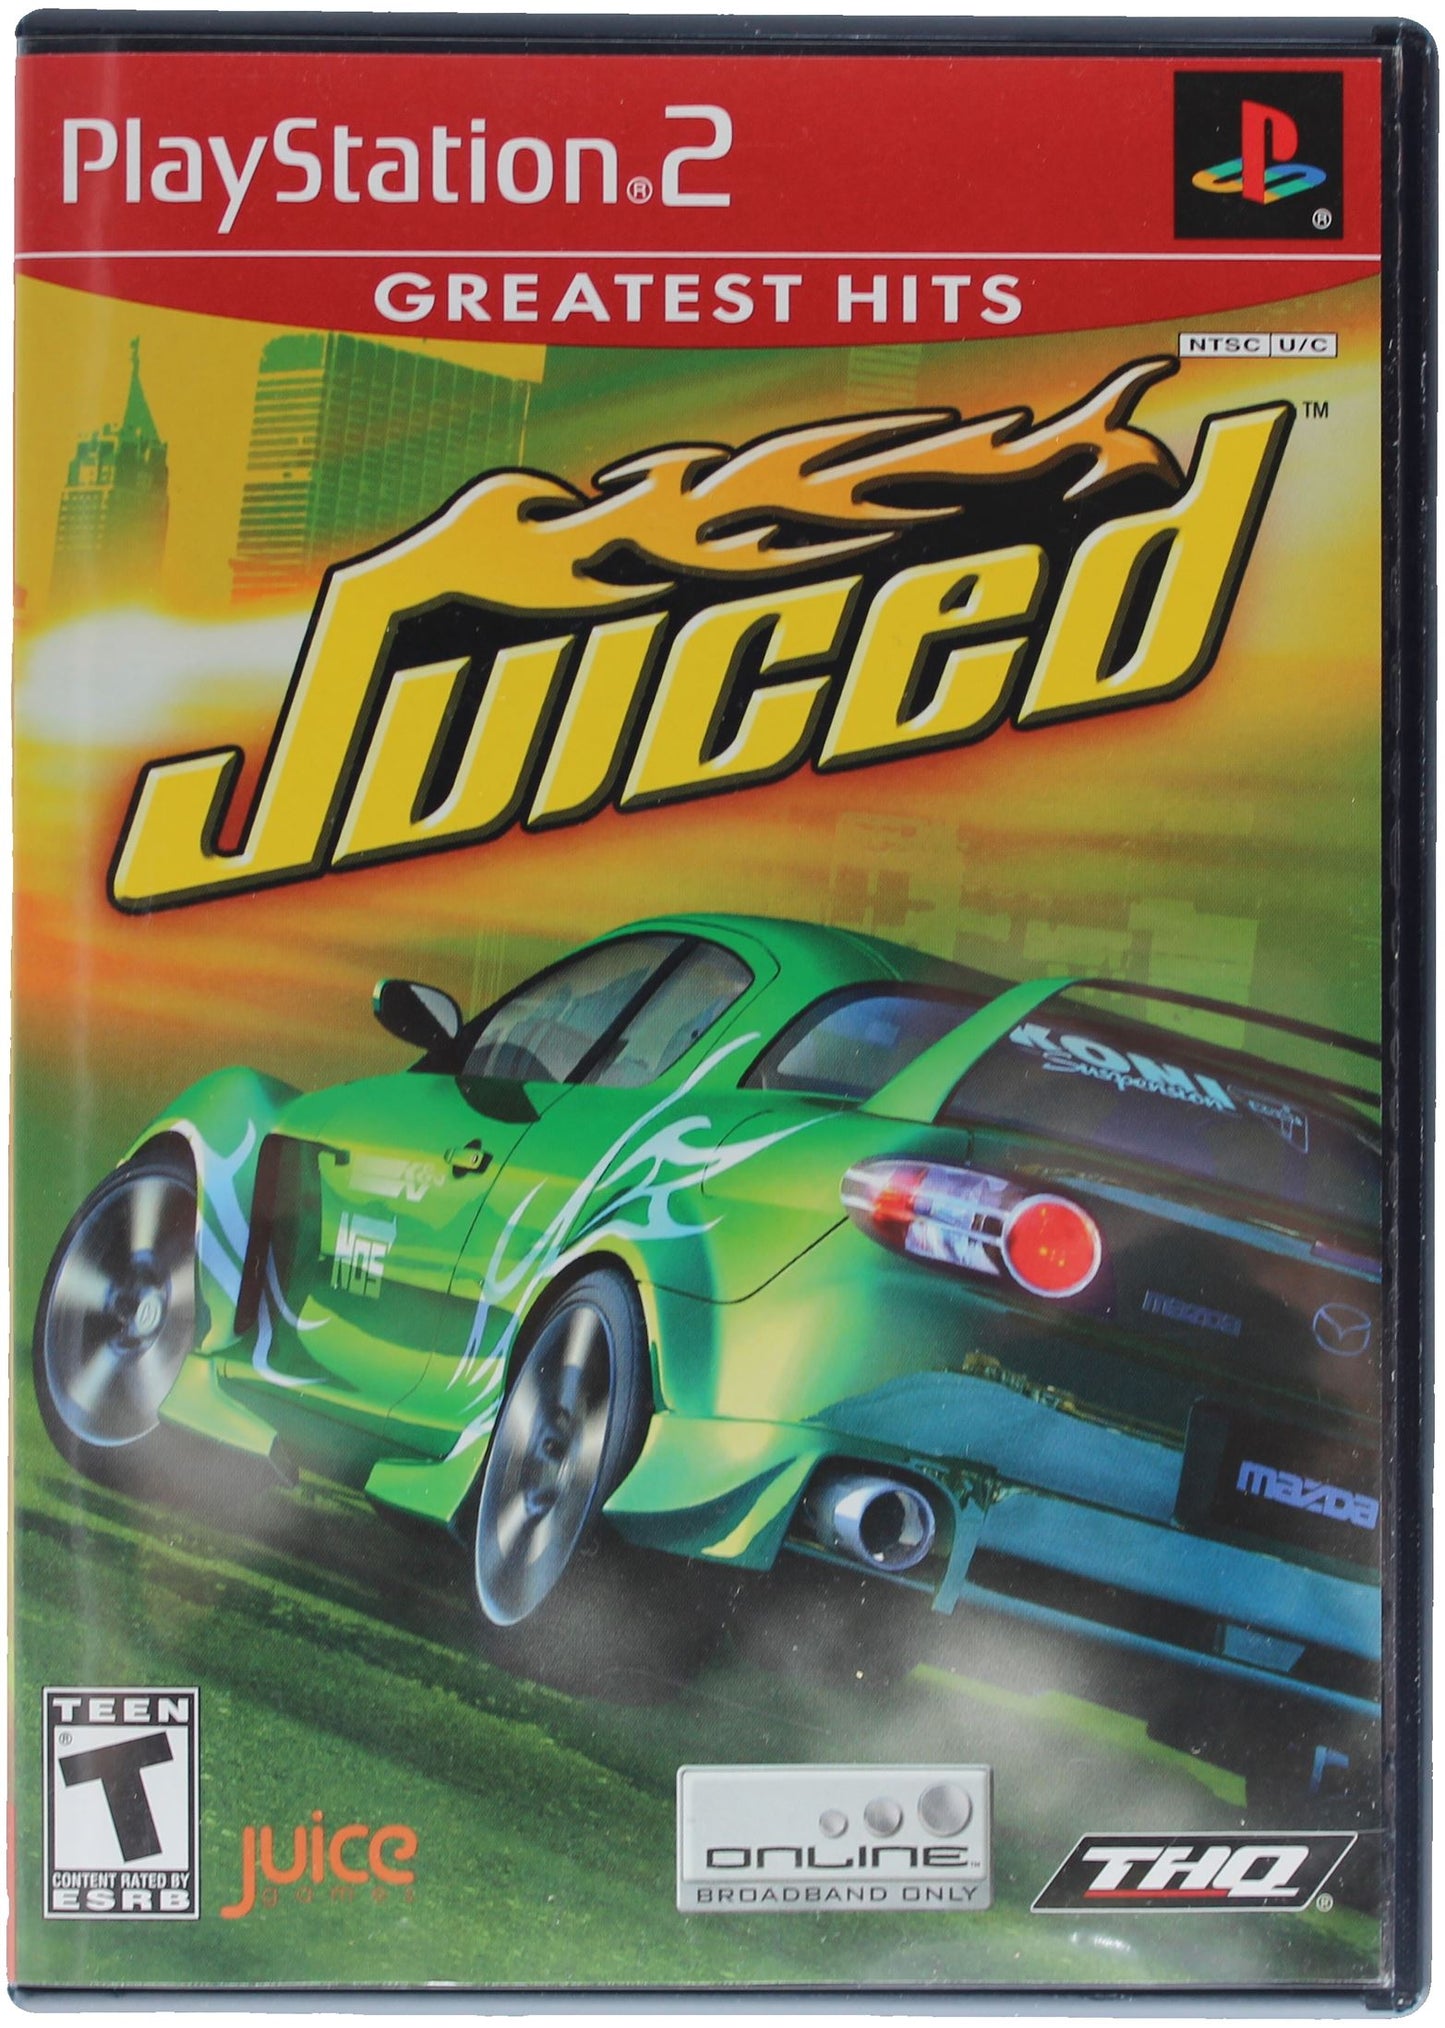 Juiced (Greatest Hits) (Playstation 2)